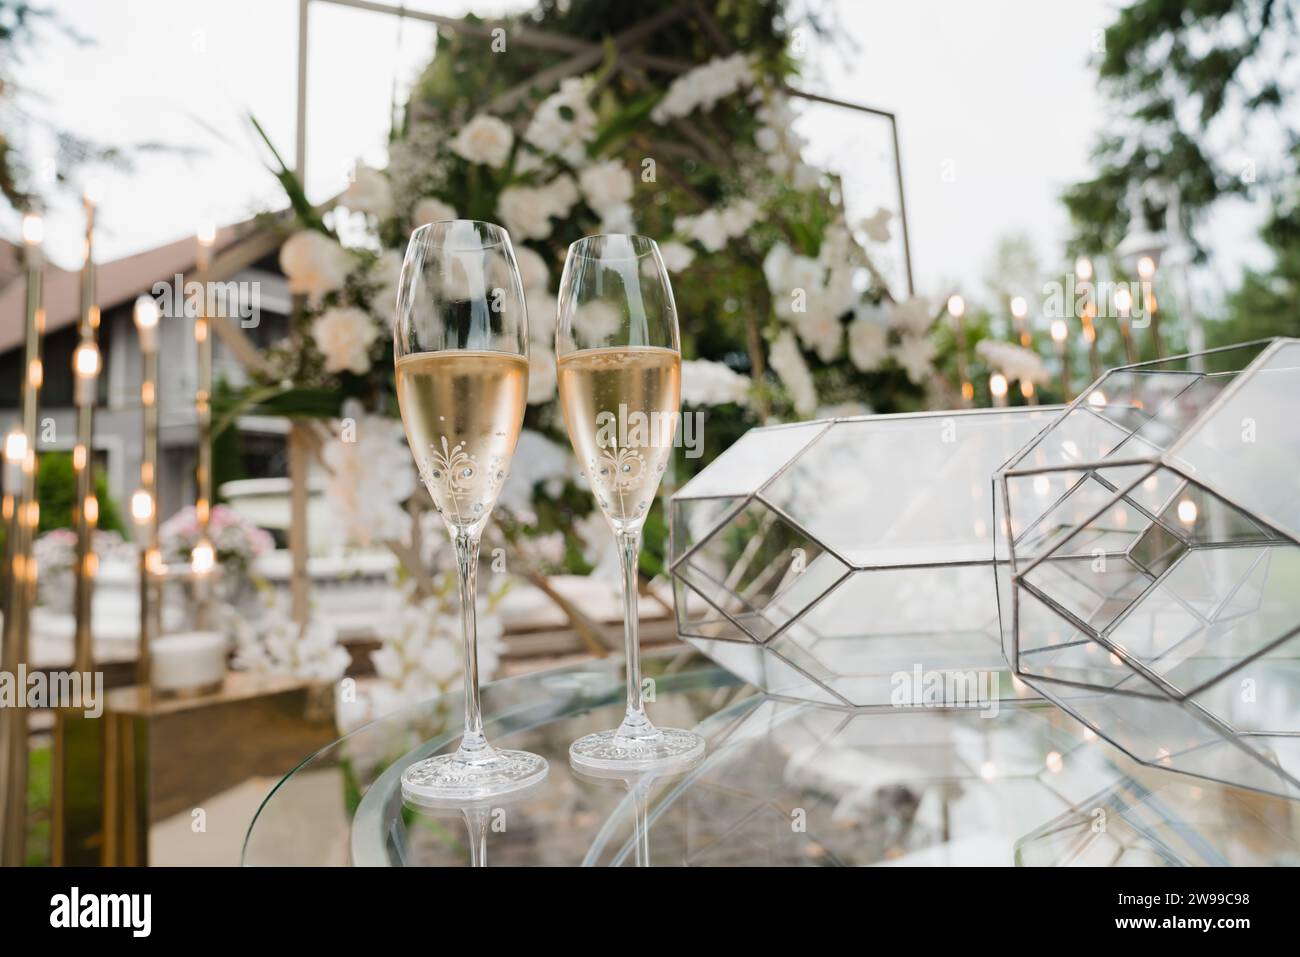 Three elegant stemmed glasses of red wine on a white-clothed table outside in a garden setting, perfect for a wedding celebration Stock Photo